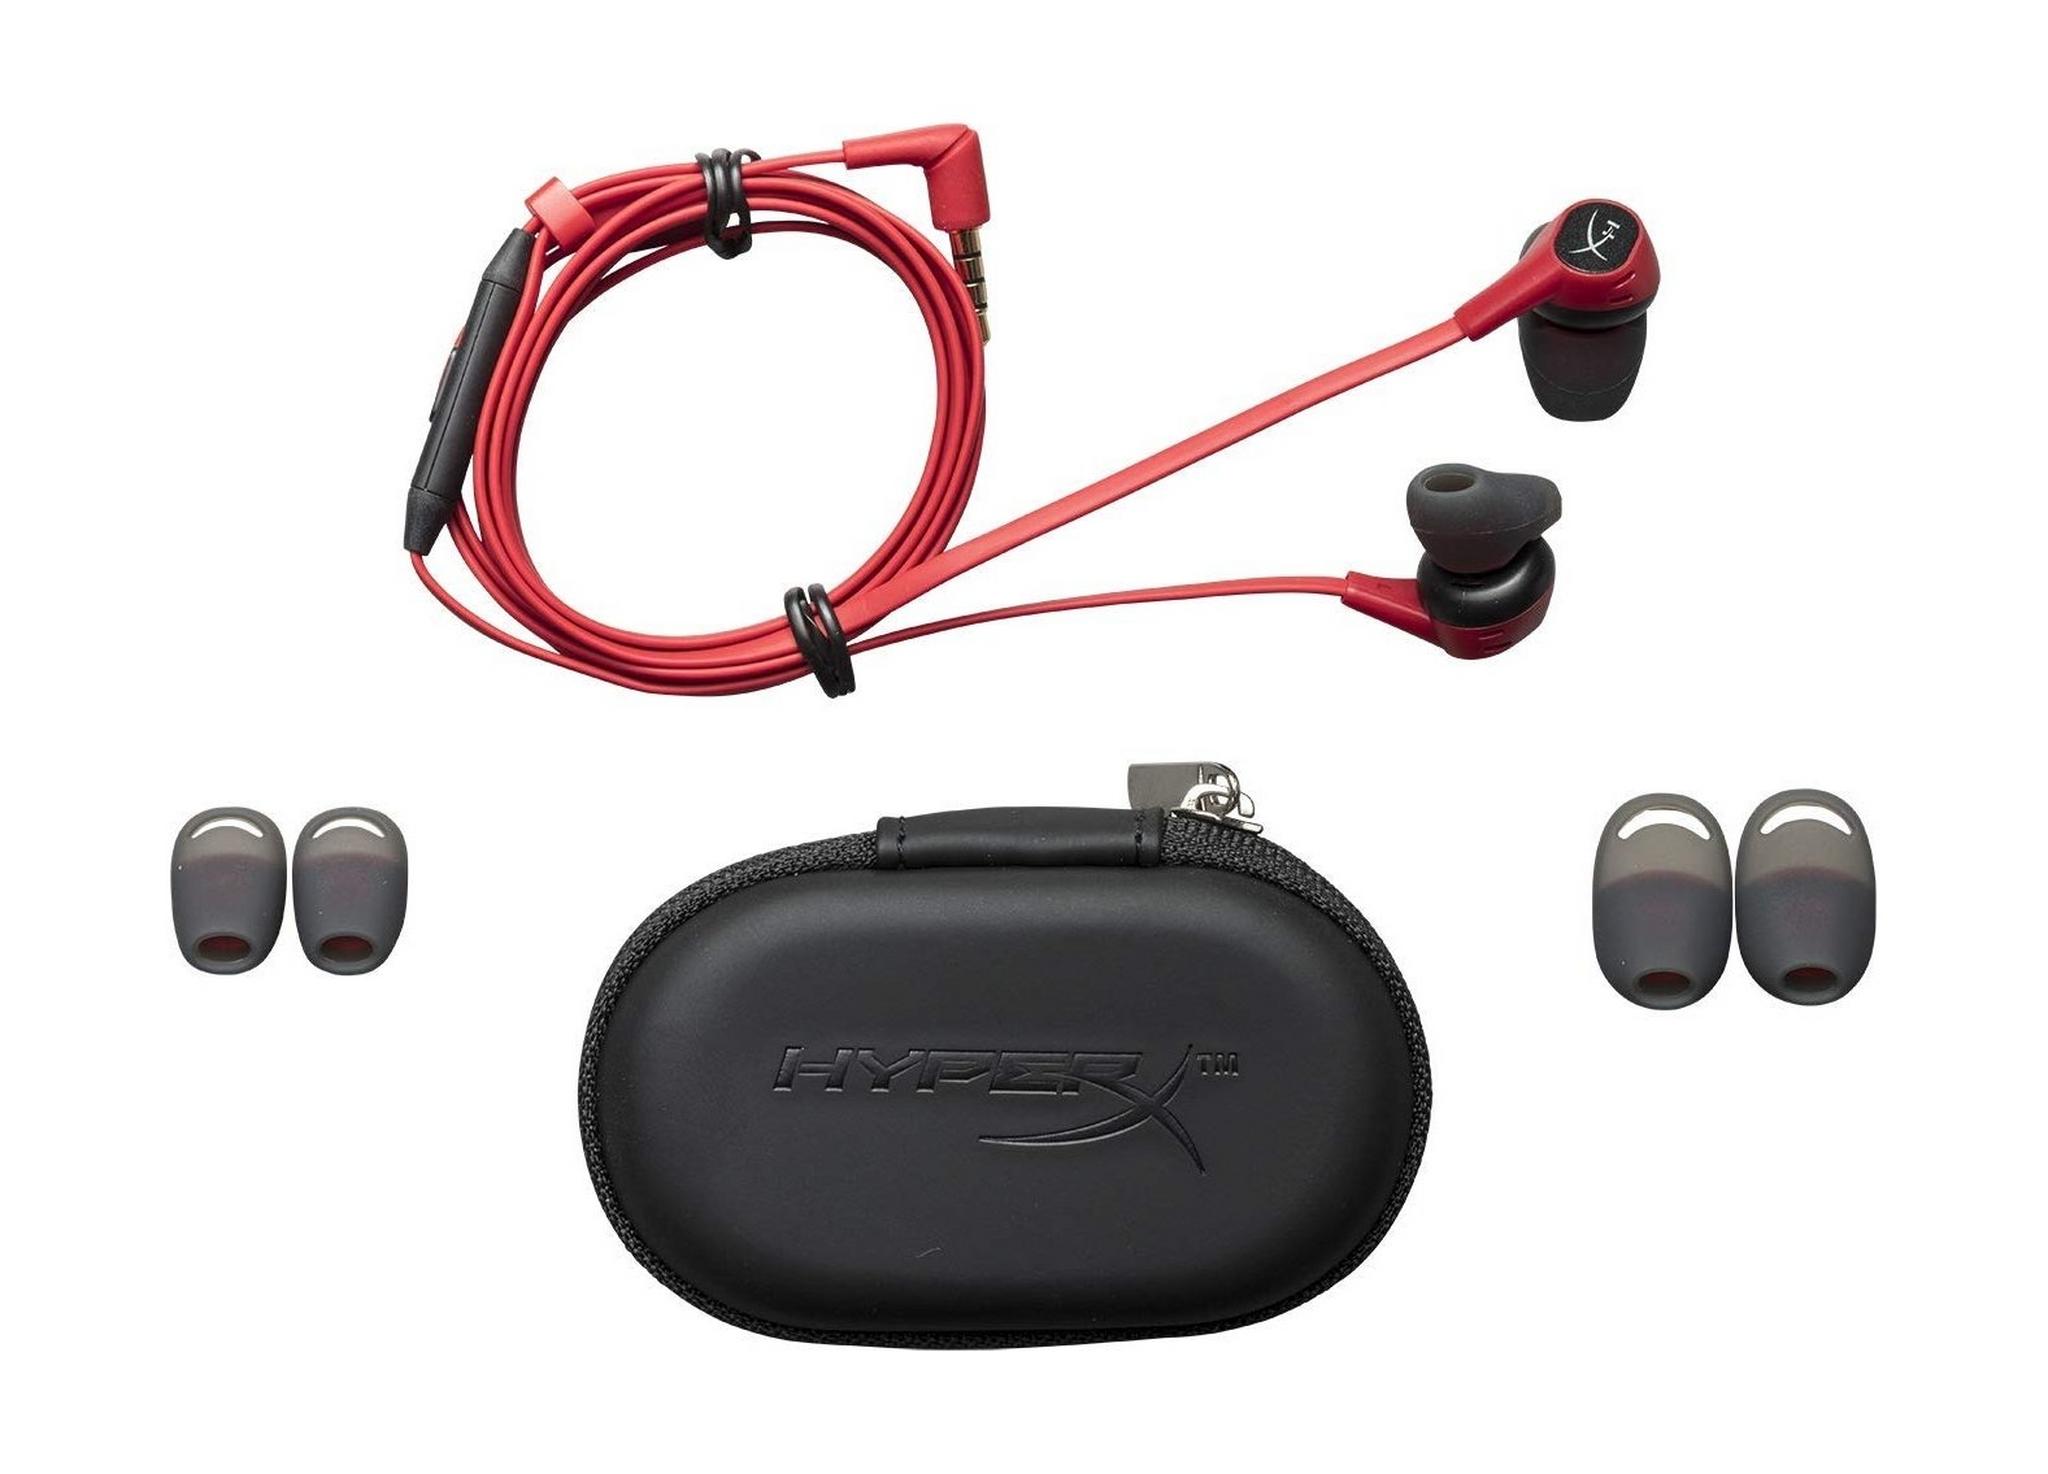 HyperX Cloud Earbuds for Nintendo Switch